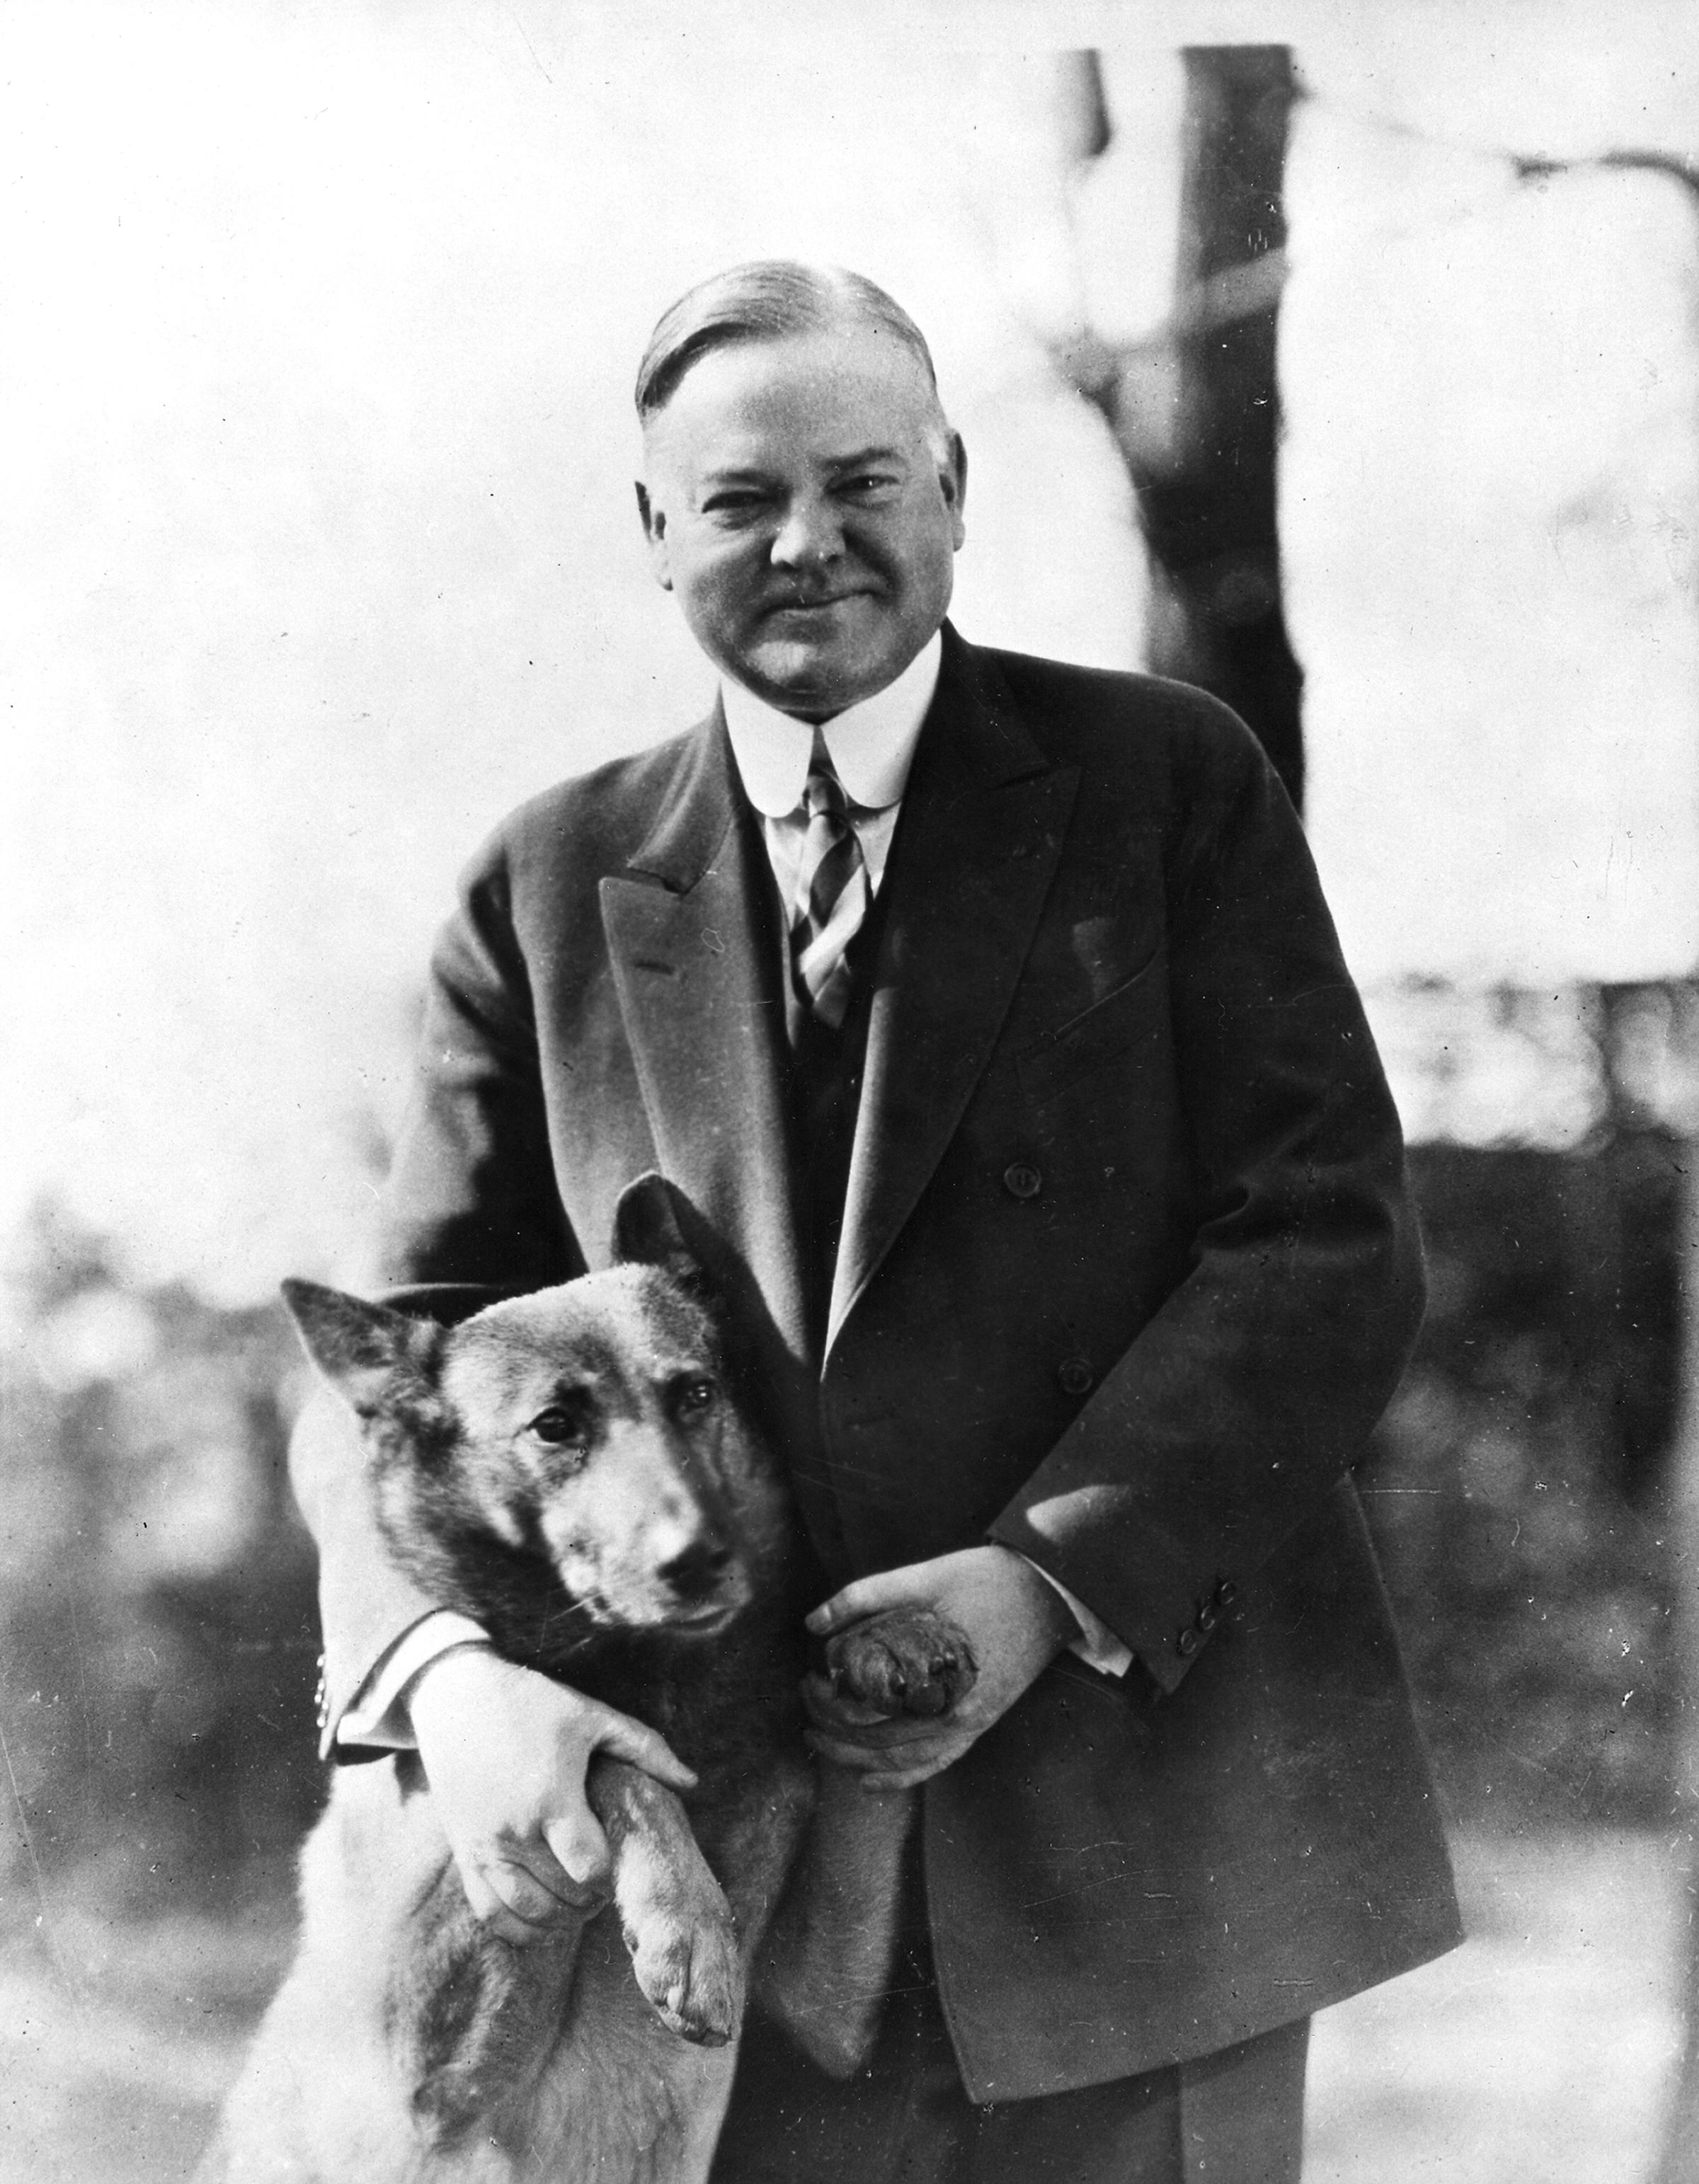 Herbert Hoover poses with his pet dog, King Tut, in the 1930s.